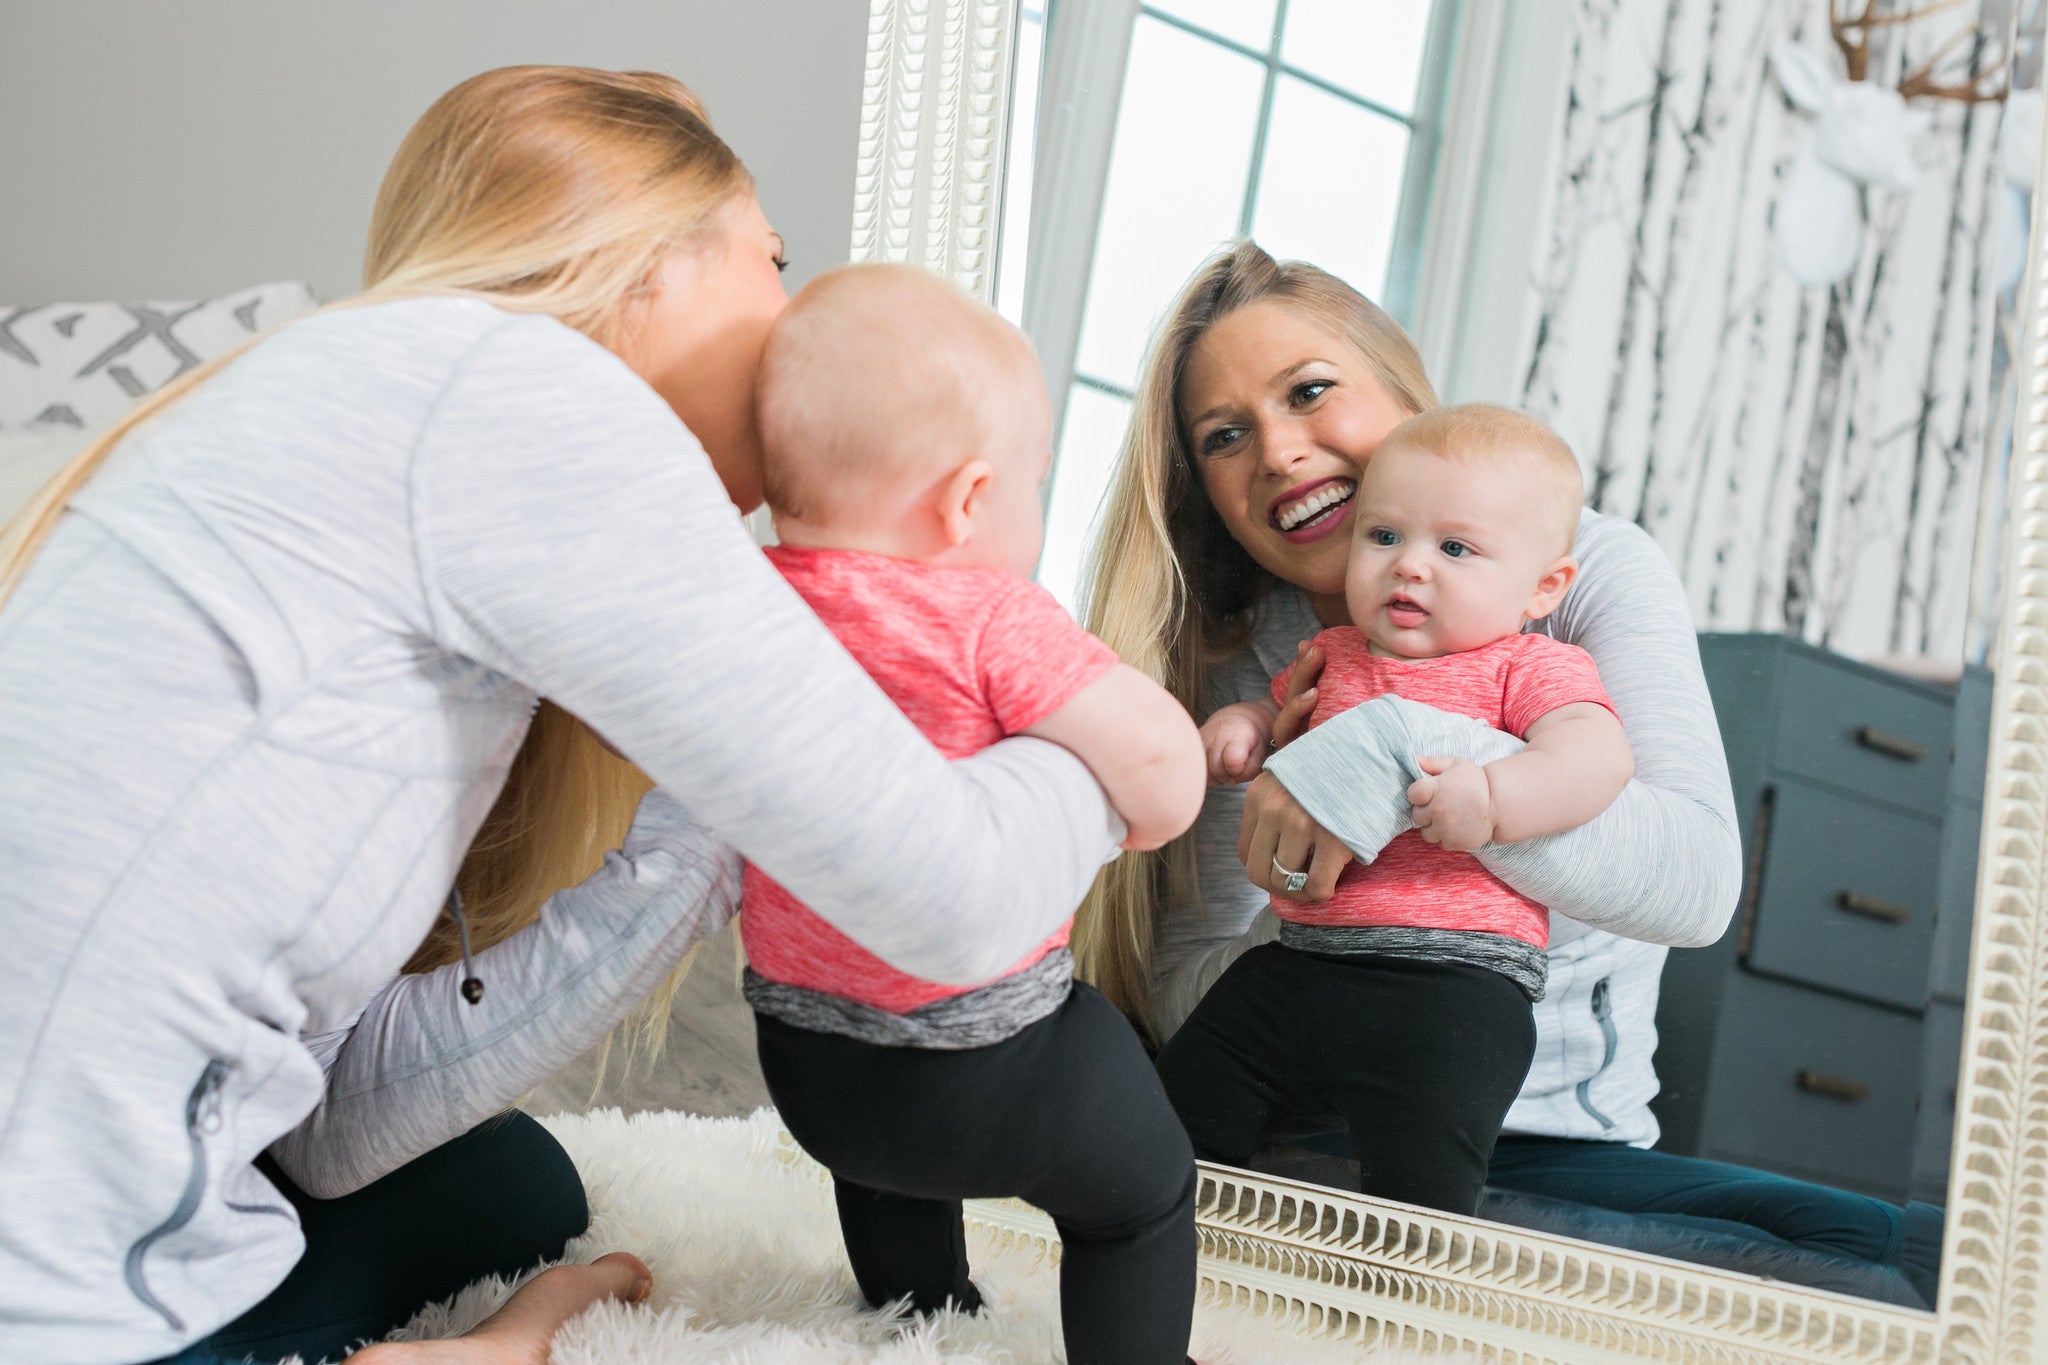 Does Your Baby Love to Look at Herself in the Mirror? Mirror Time Might Be More Important Than You Think